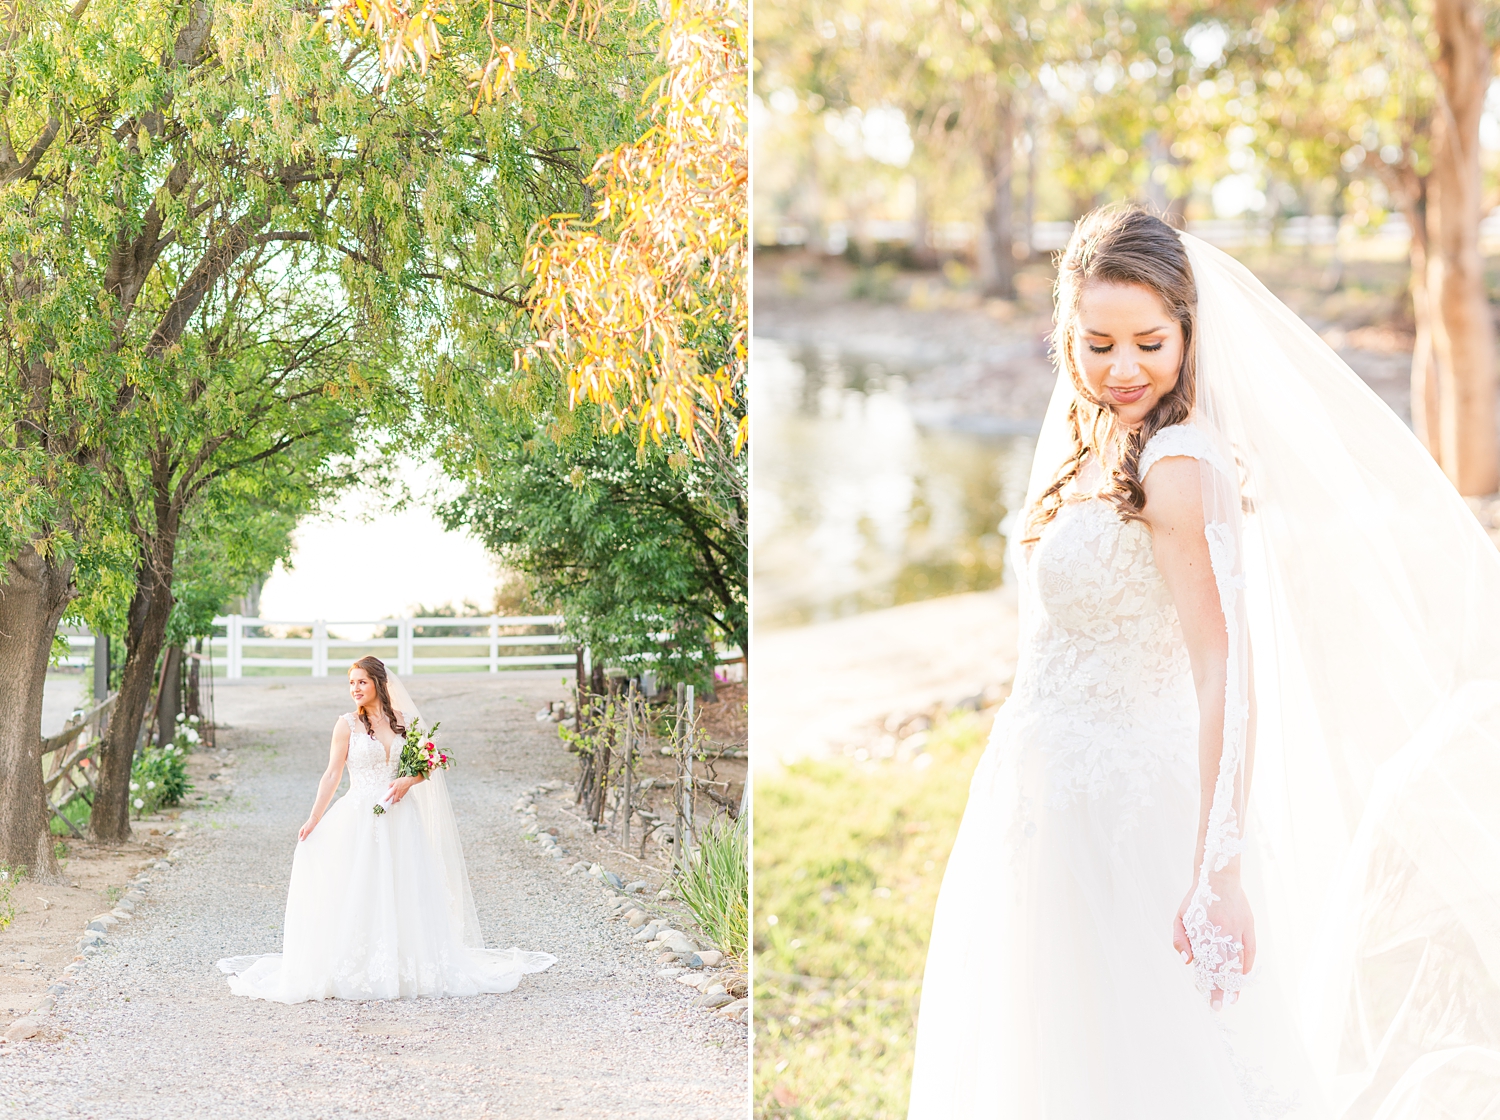 Bridal Session in a winery in temecula from a Temecula Wedding Photographer_0016.jpg